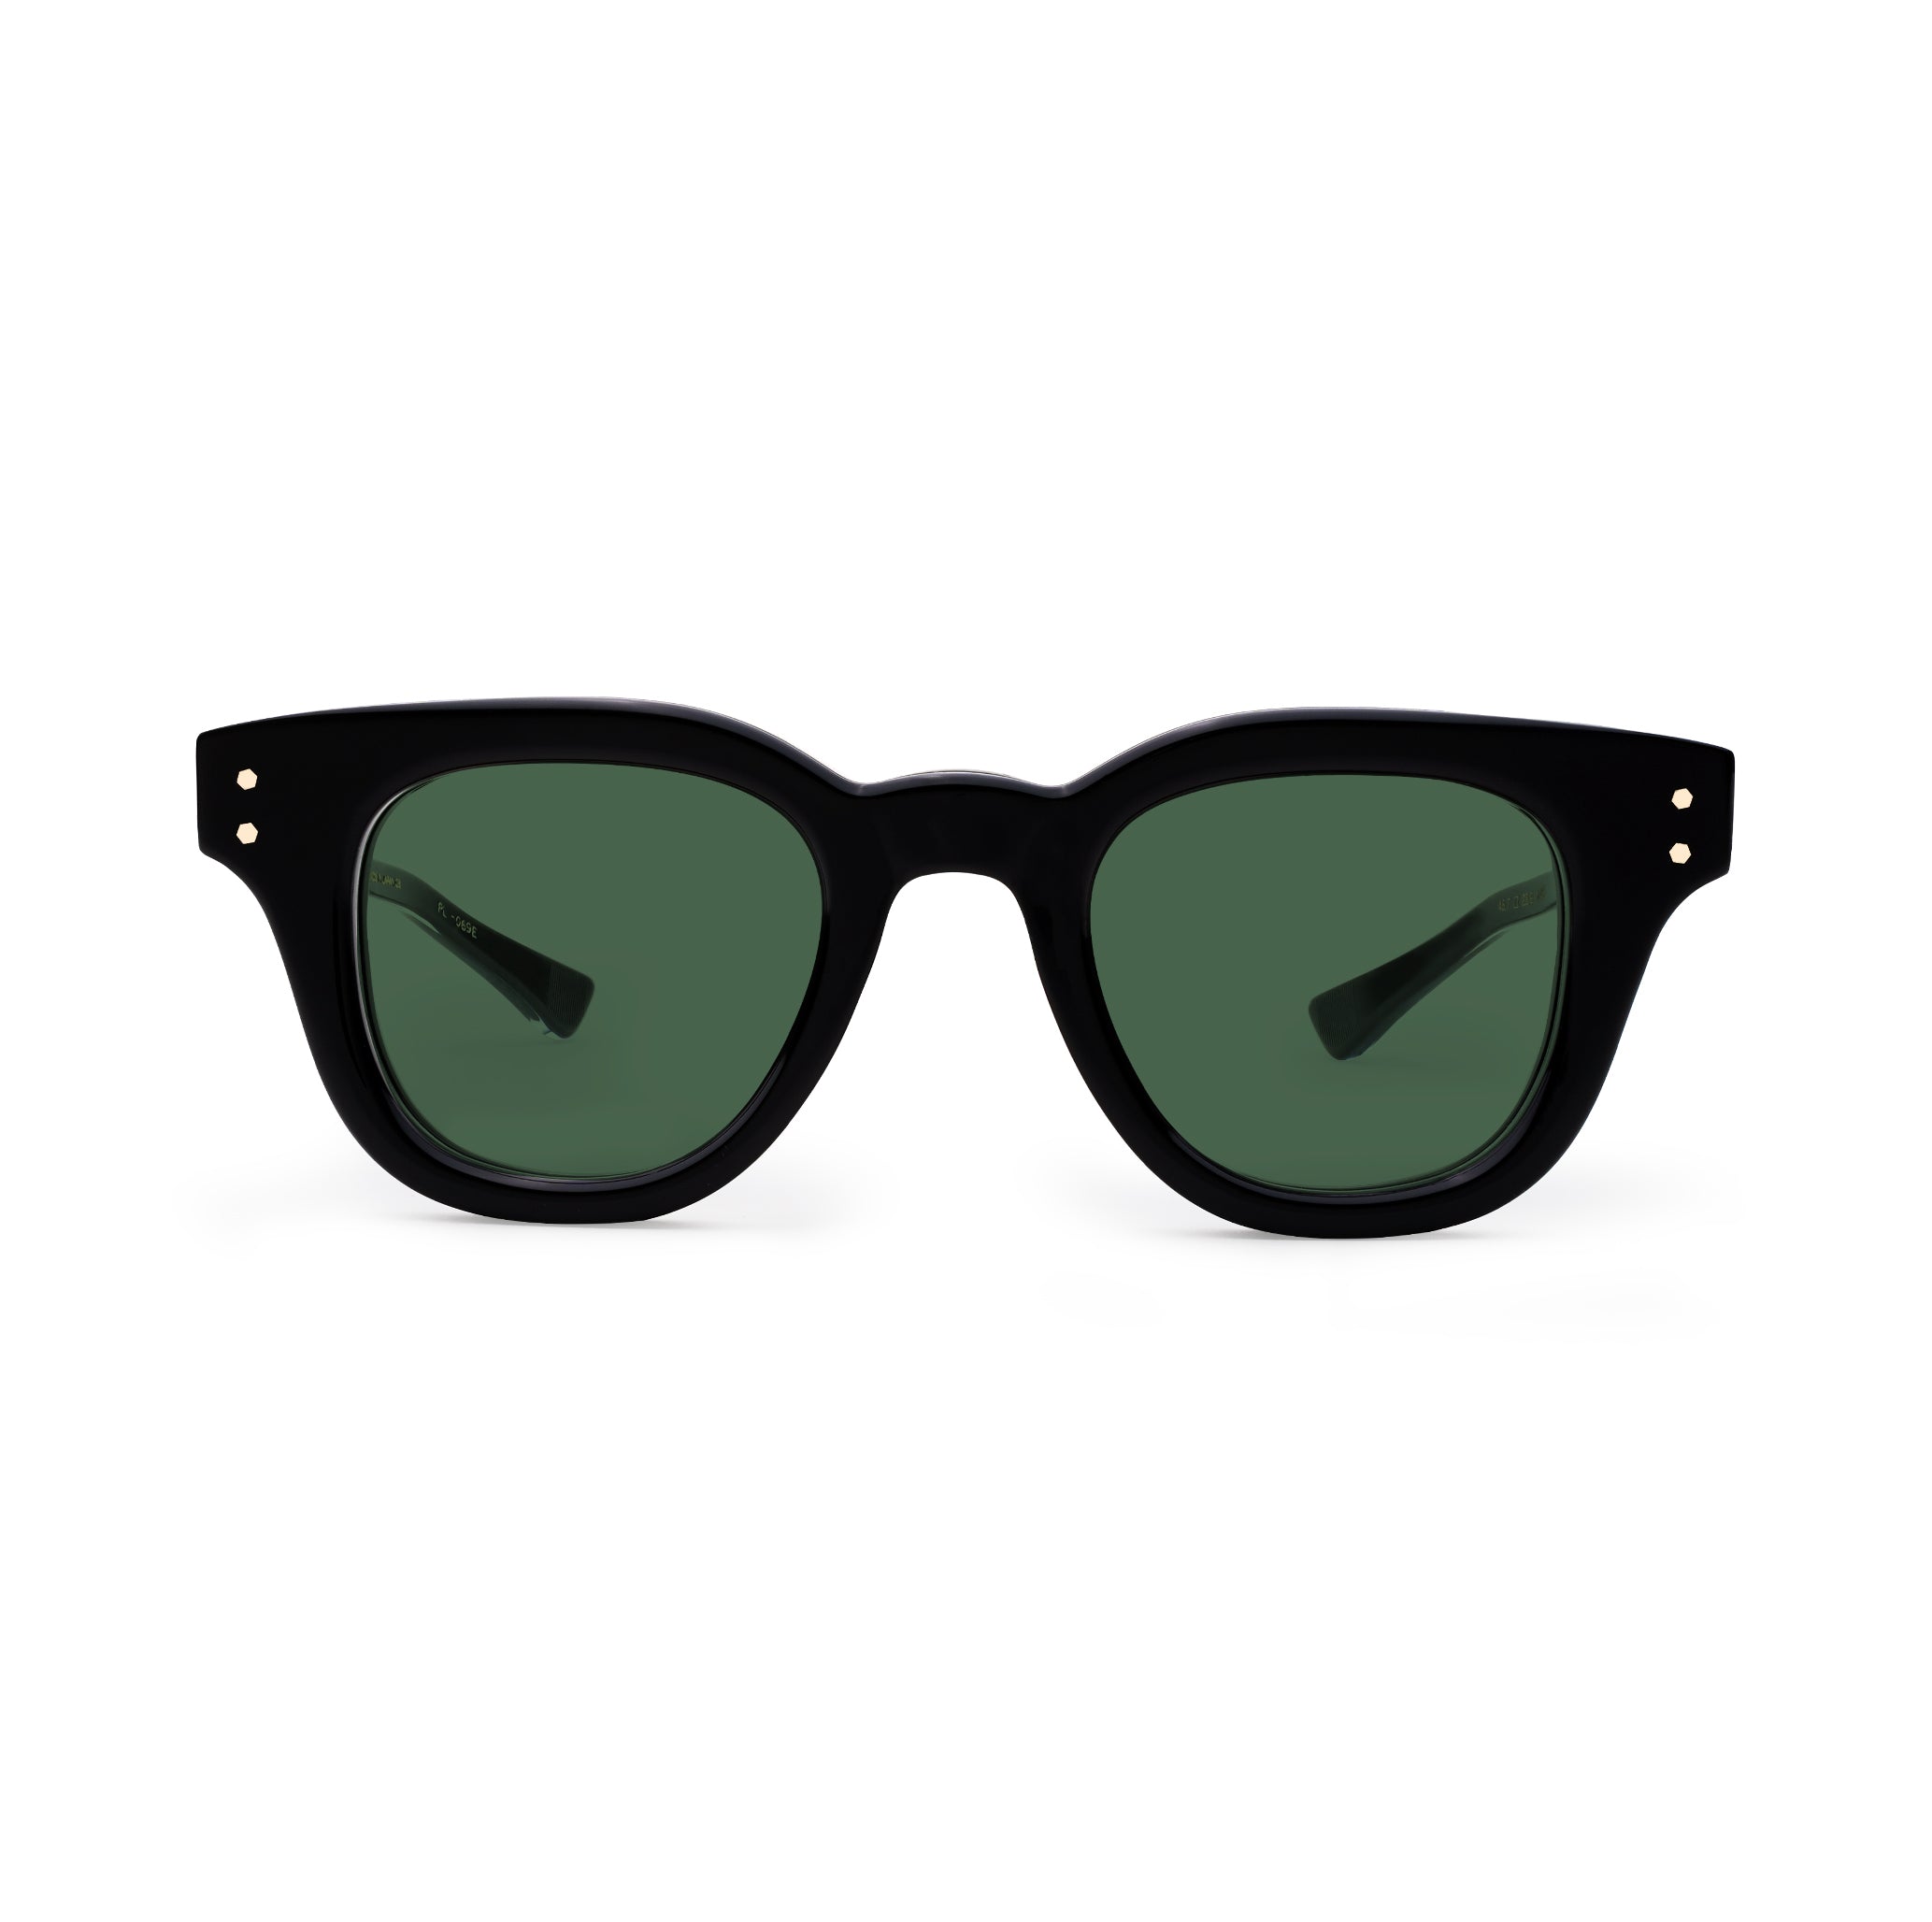 Native Sons Eyewear - Handcrafted in Japan for sunglasses 